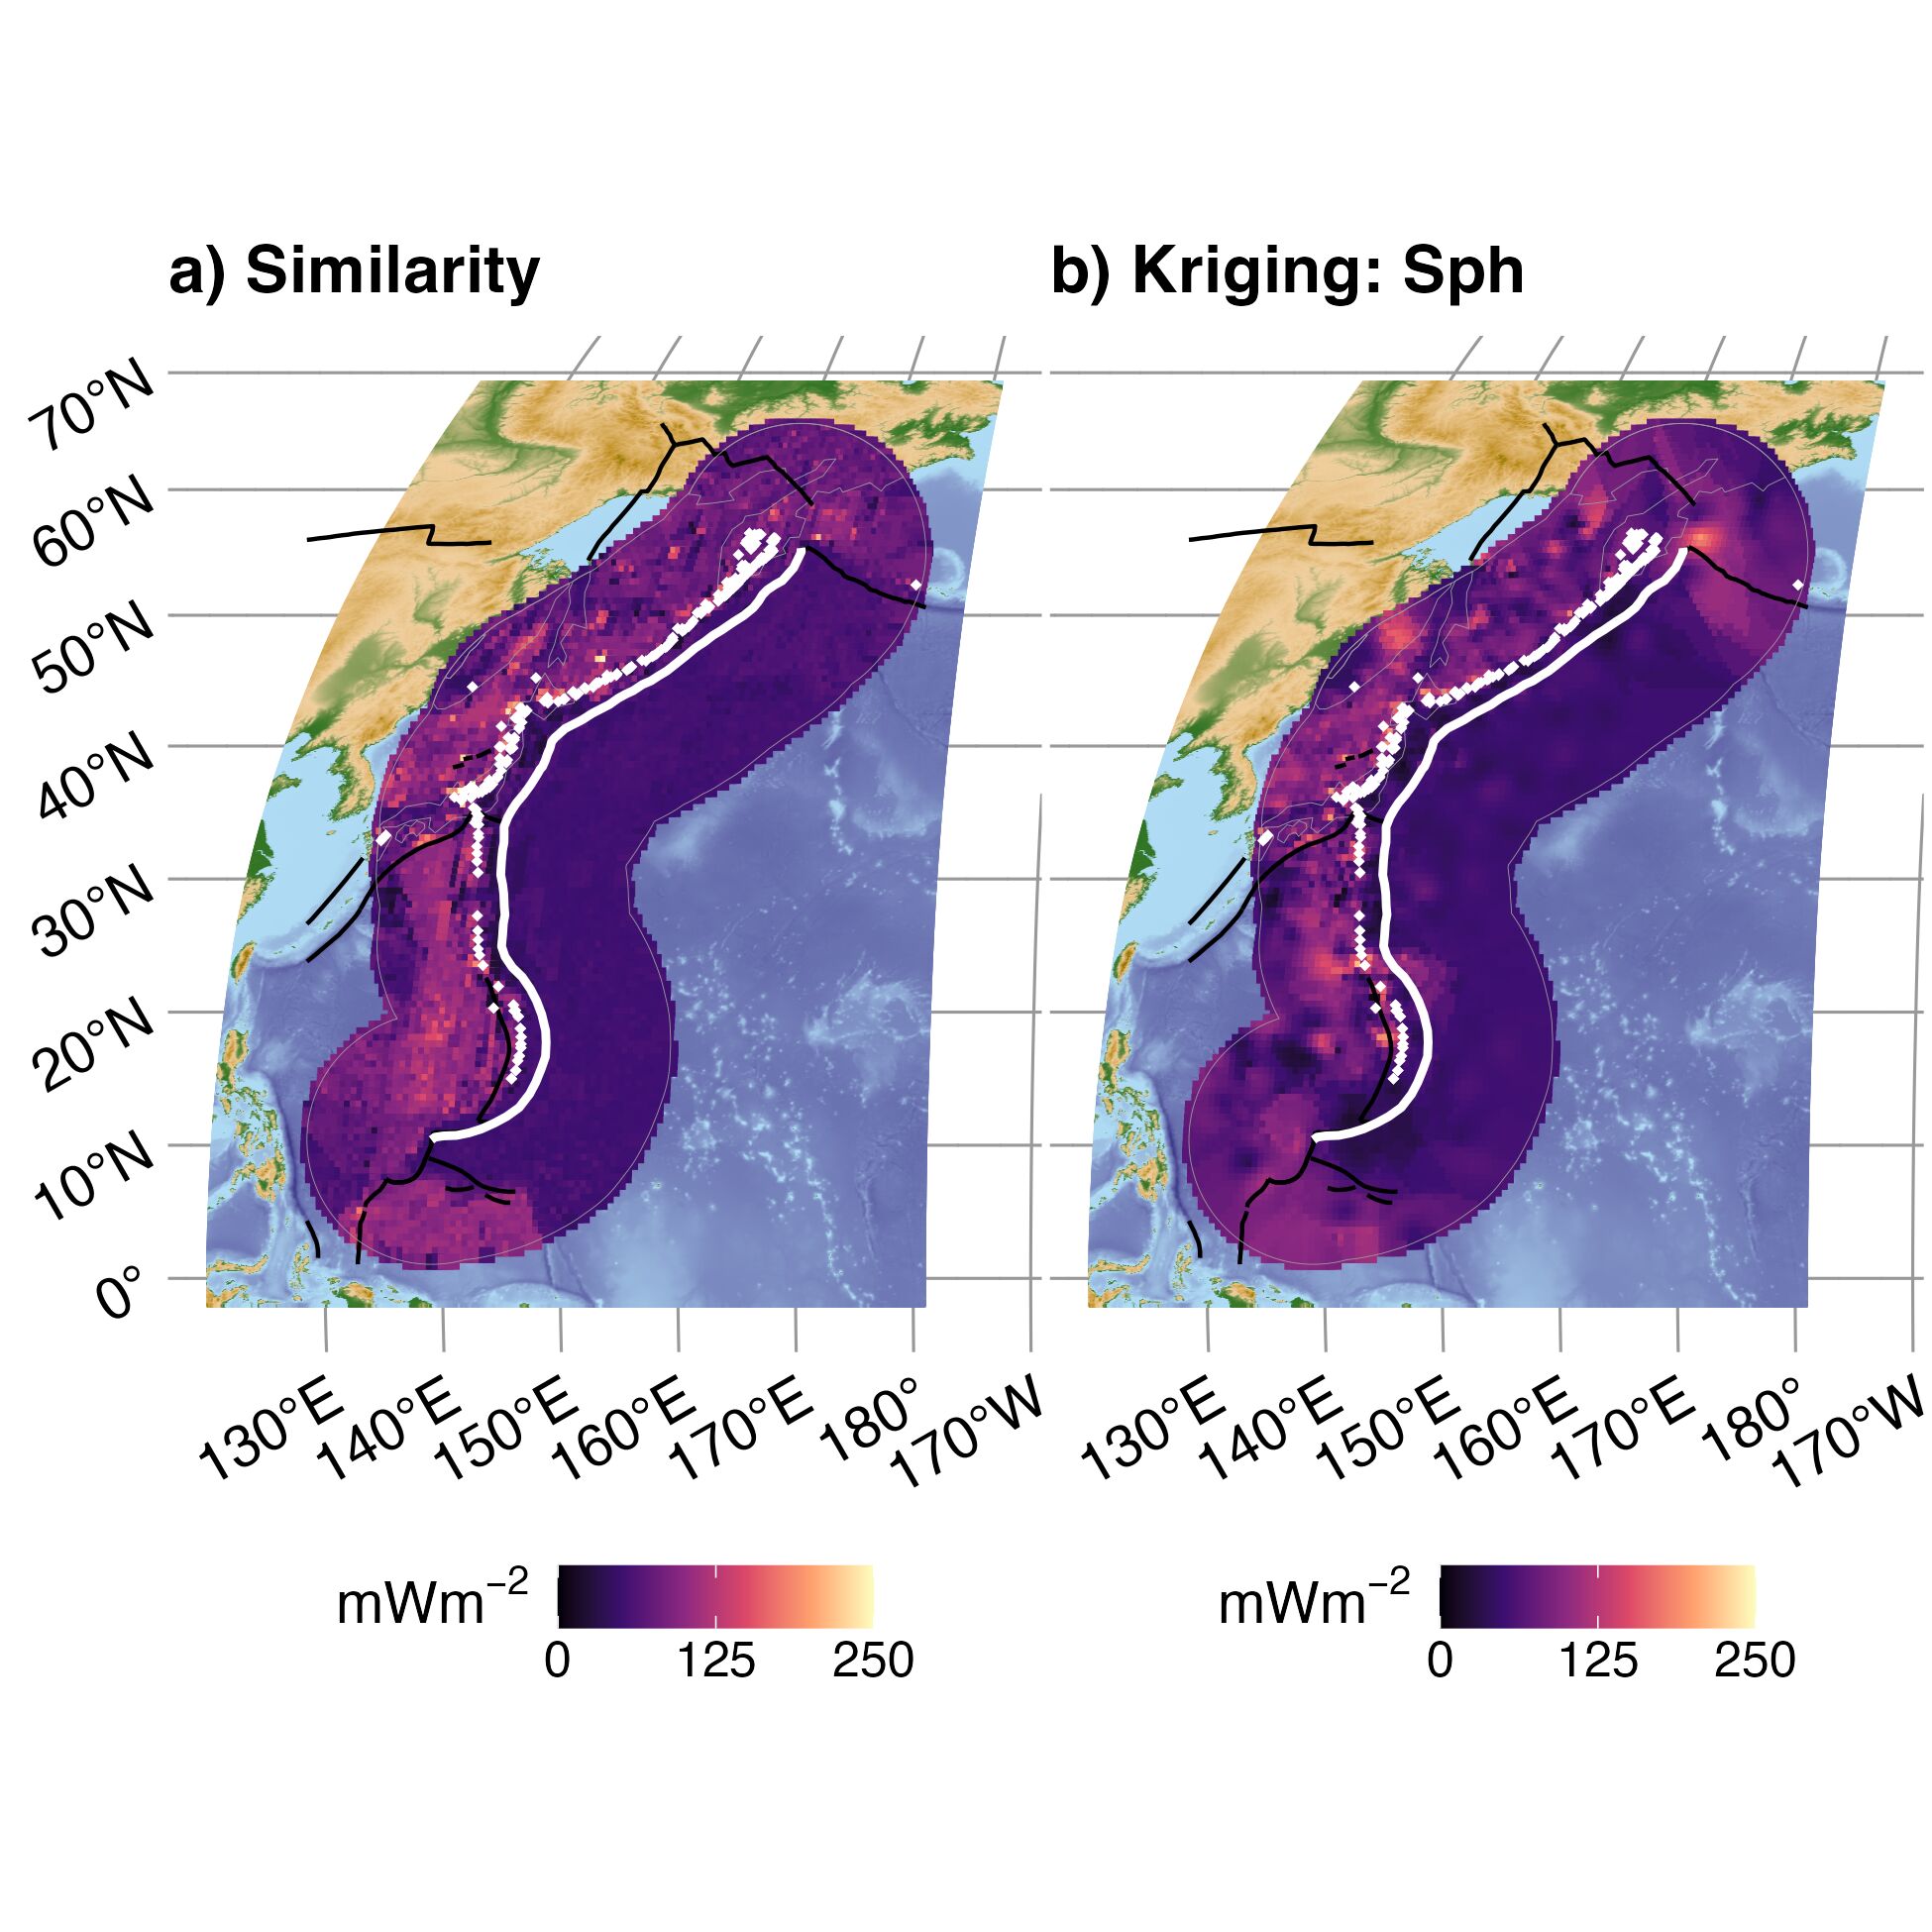 Similarity (a) and Kriging (b) interpolations for Kamchatka Marianas. Refer to the main text for explanation of panels and colors.